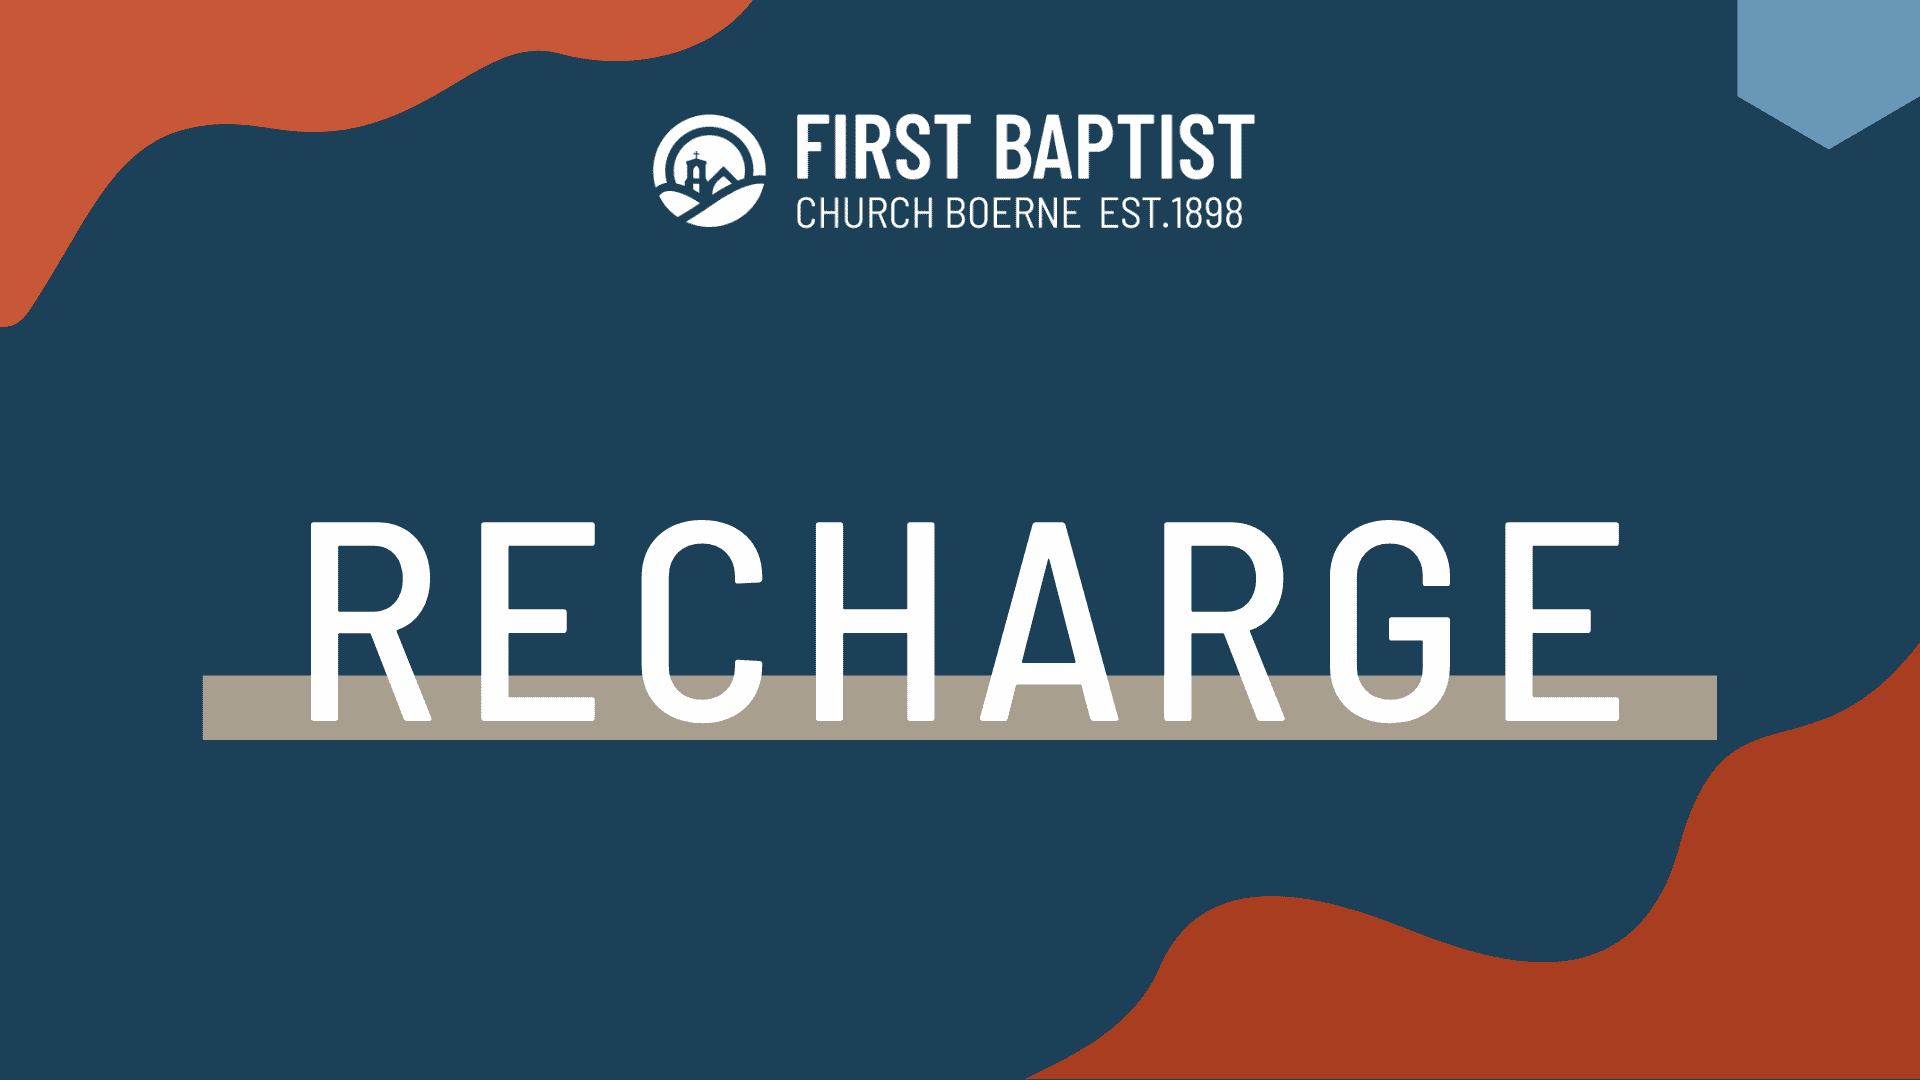 RECHARGE: How far did we fall?